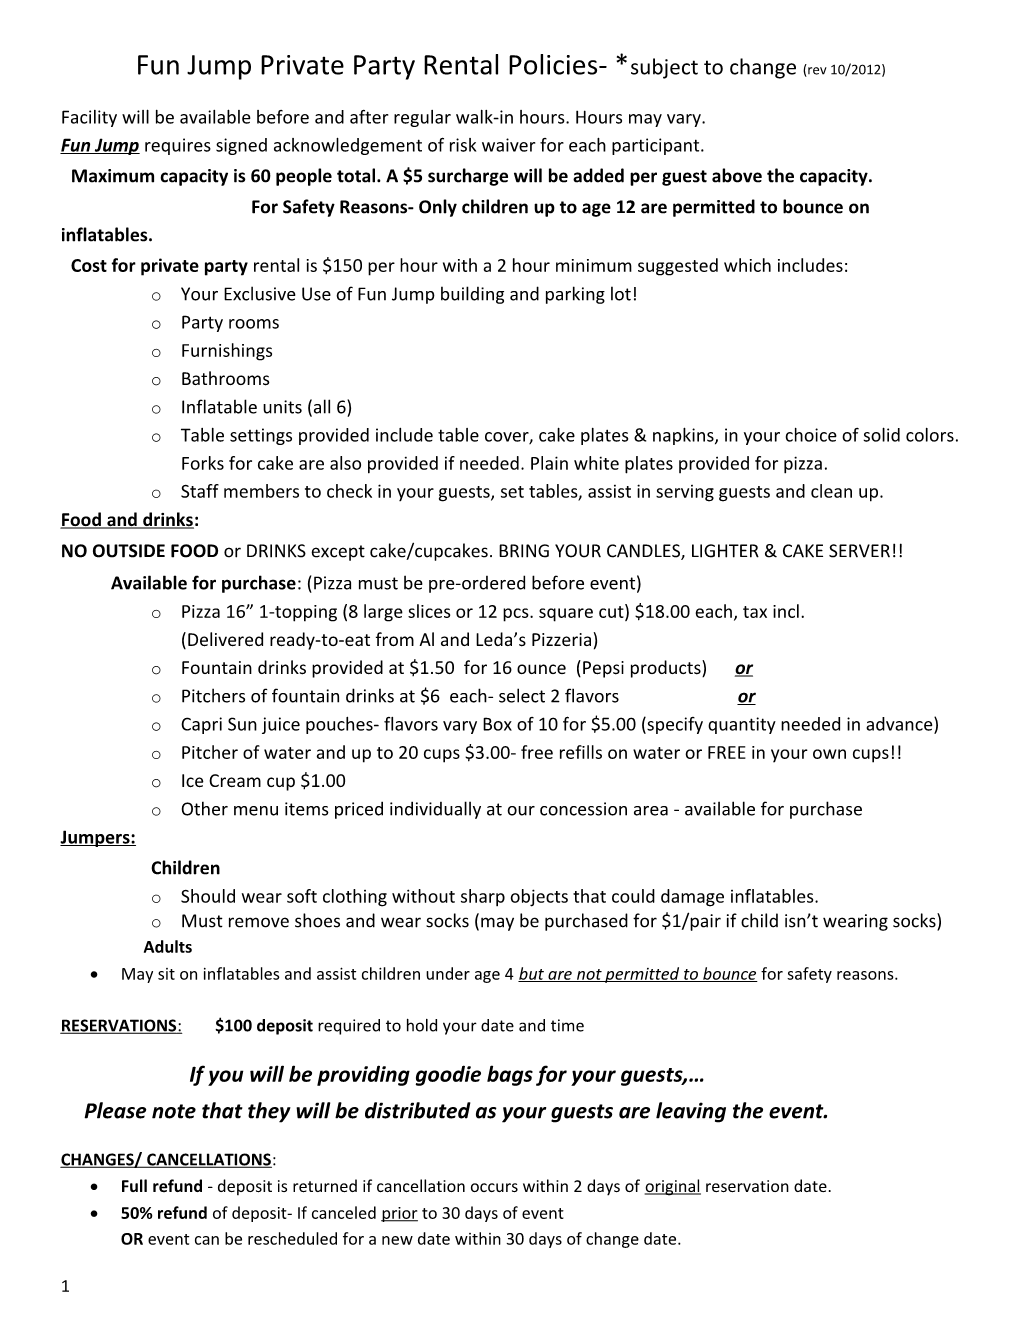 Fun Jump Private Party Rental Policies- *Subject to Change (Rev 10/2012)